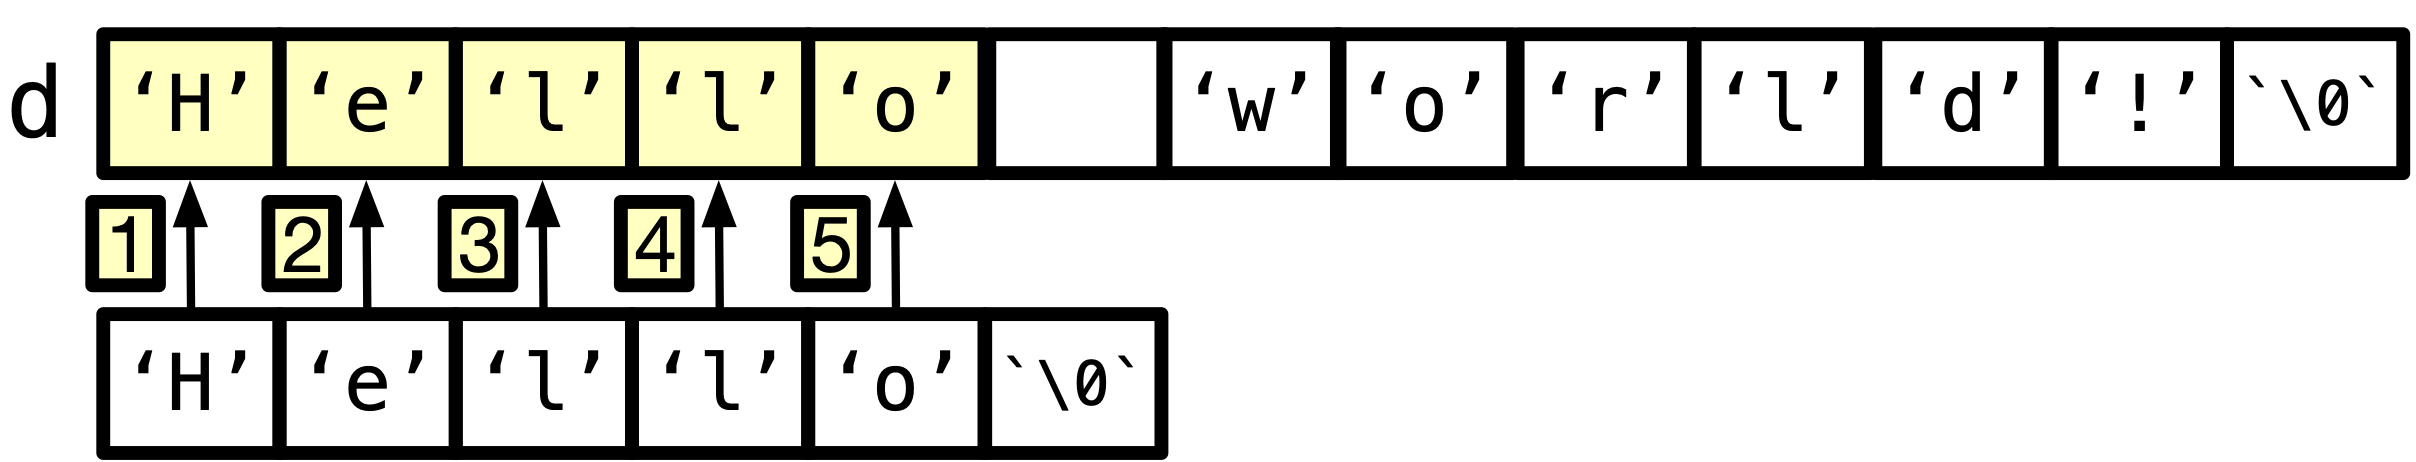 Copy 5 characters including the null character.